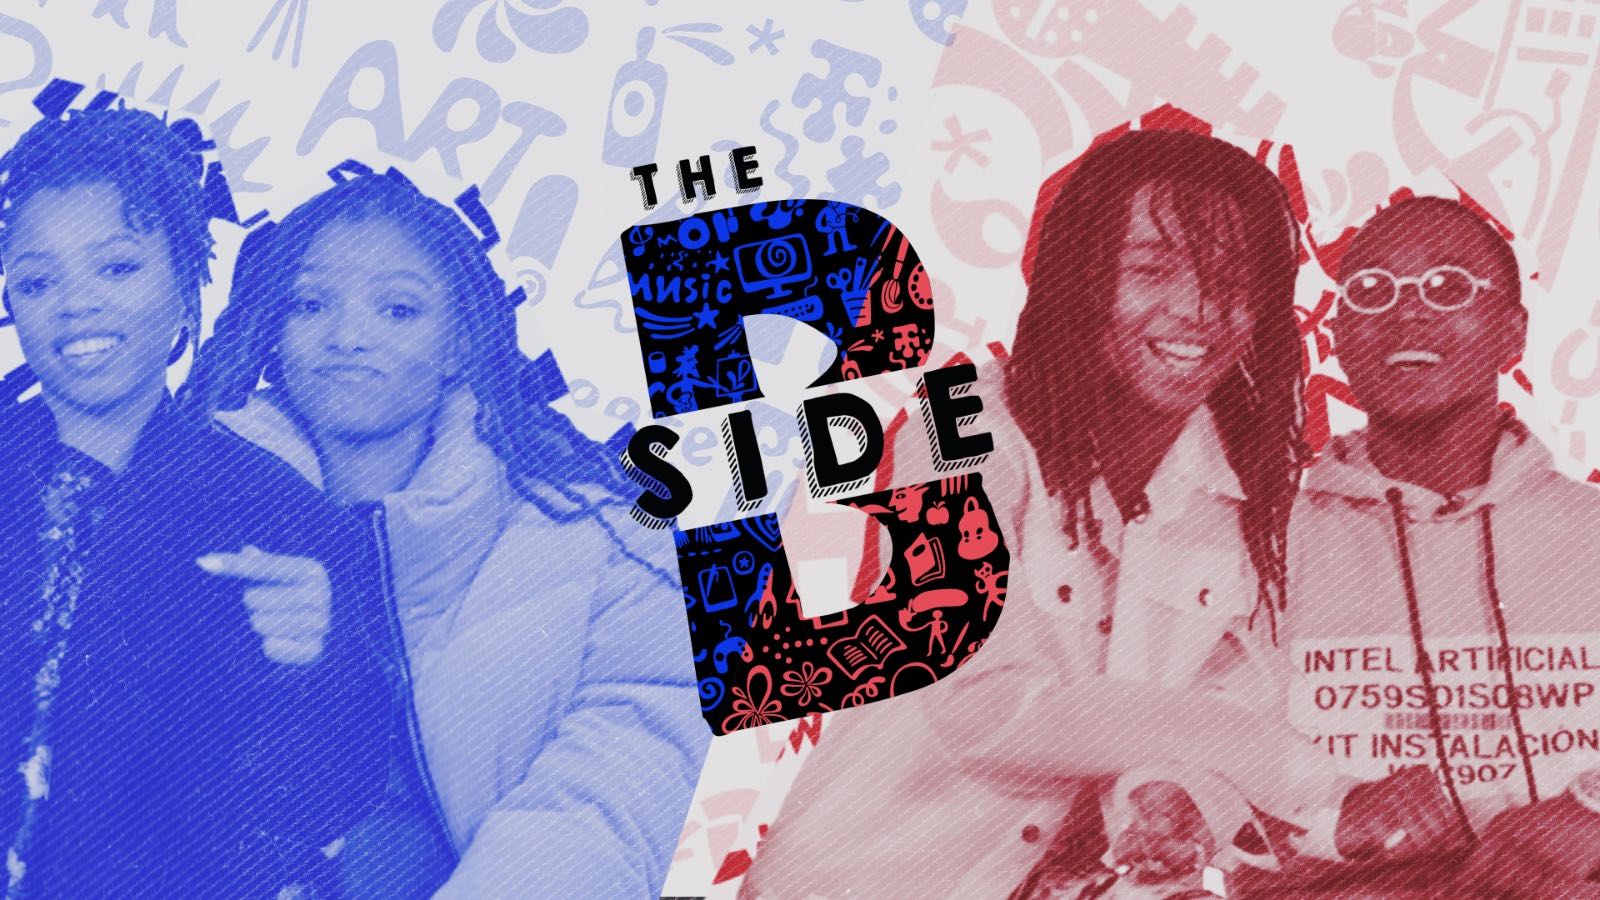 ‘The B-Side’: Who Knows More About Black Culture? Watch Chloe x Halle Battle Rae Sremmurd For The Crown